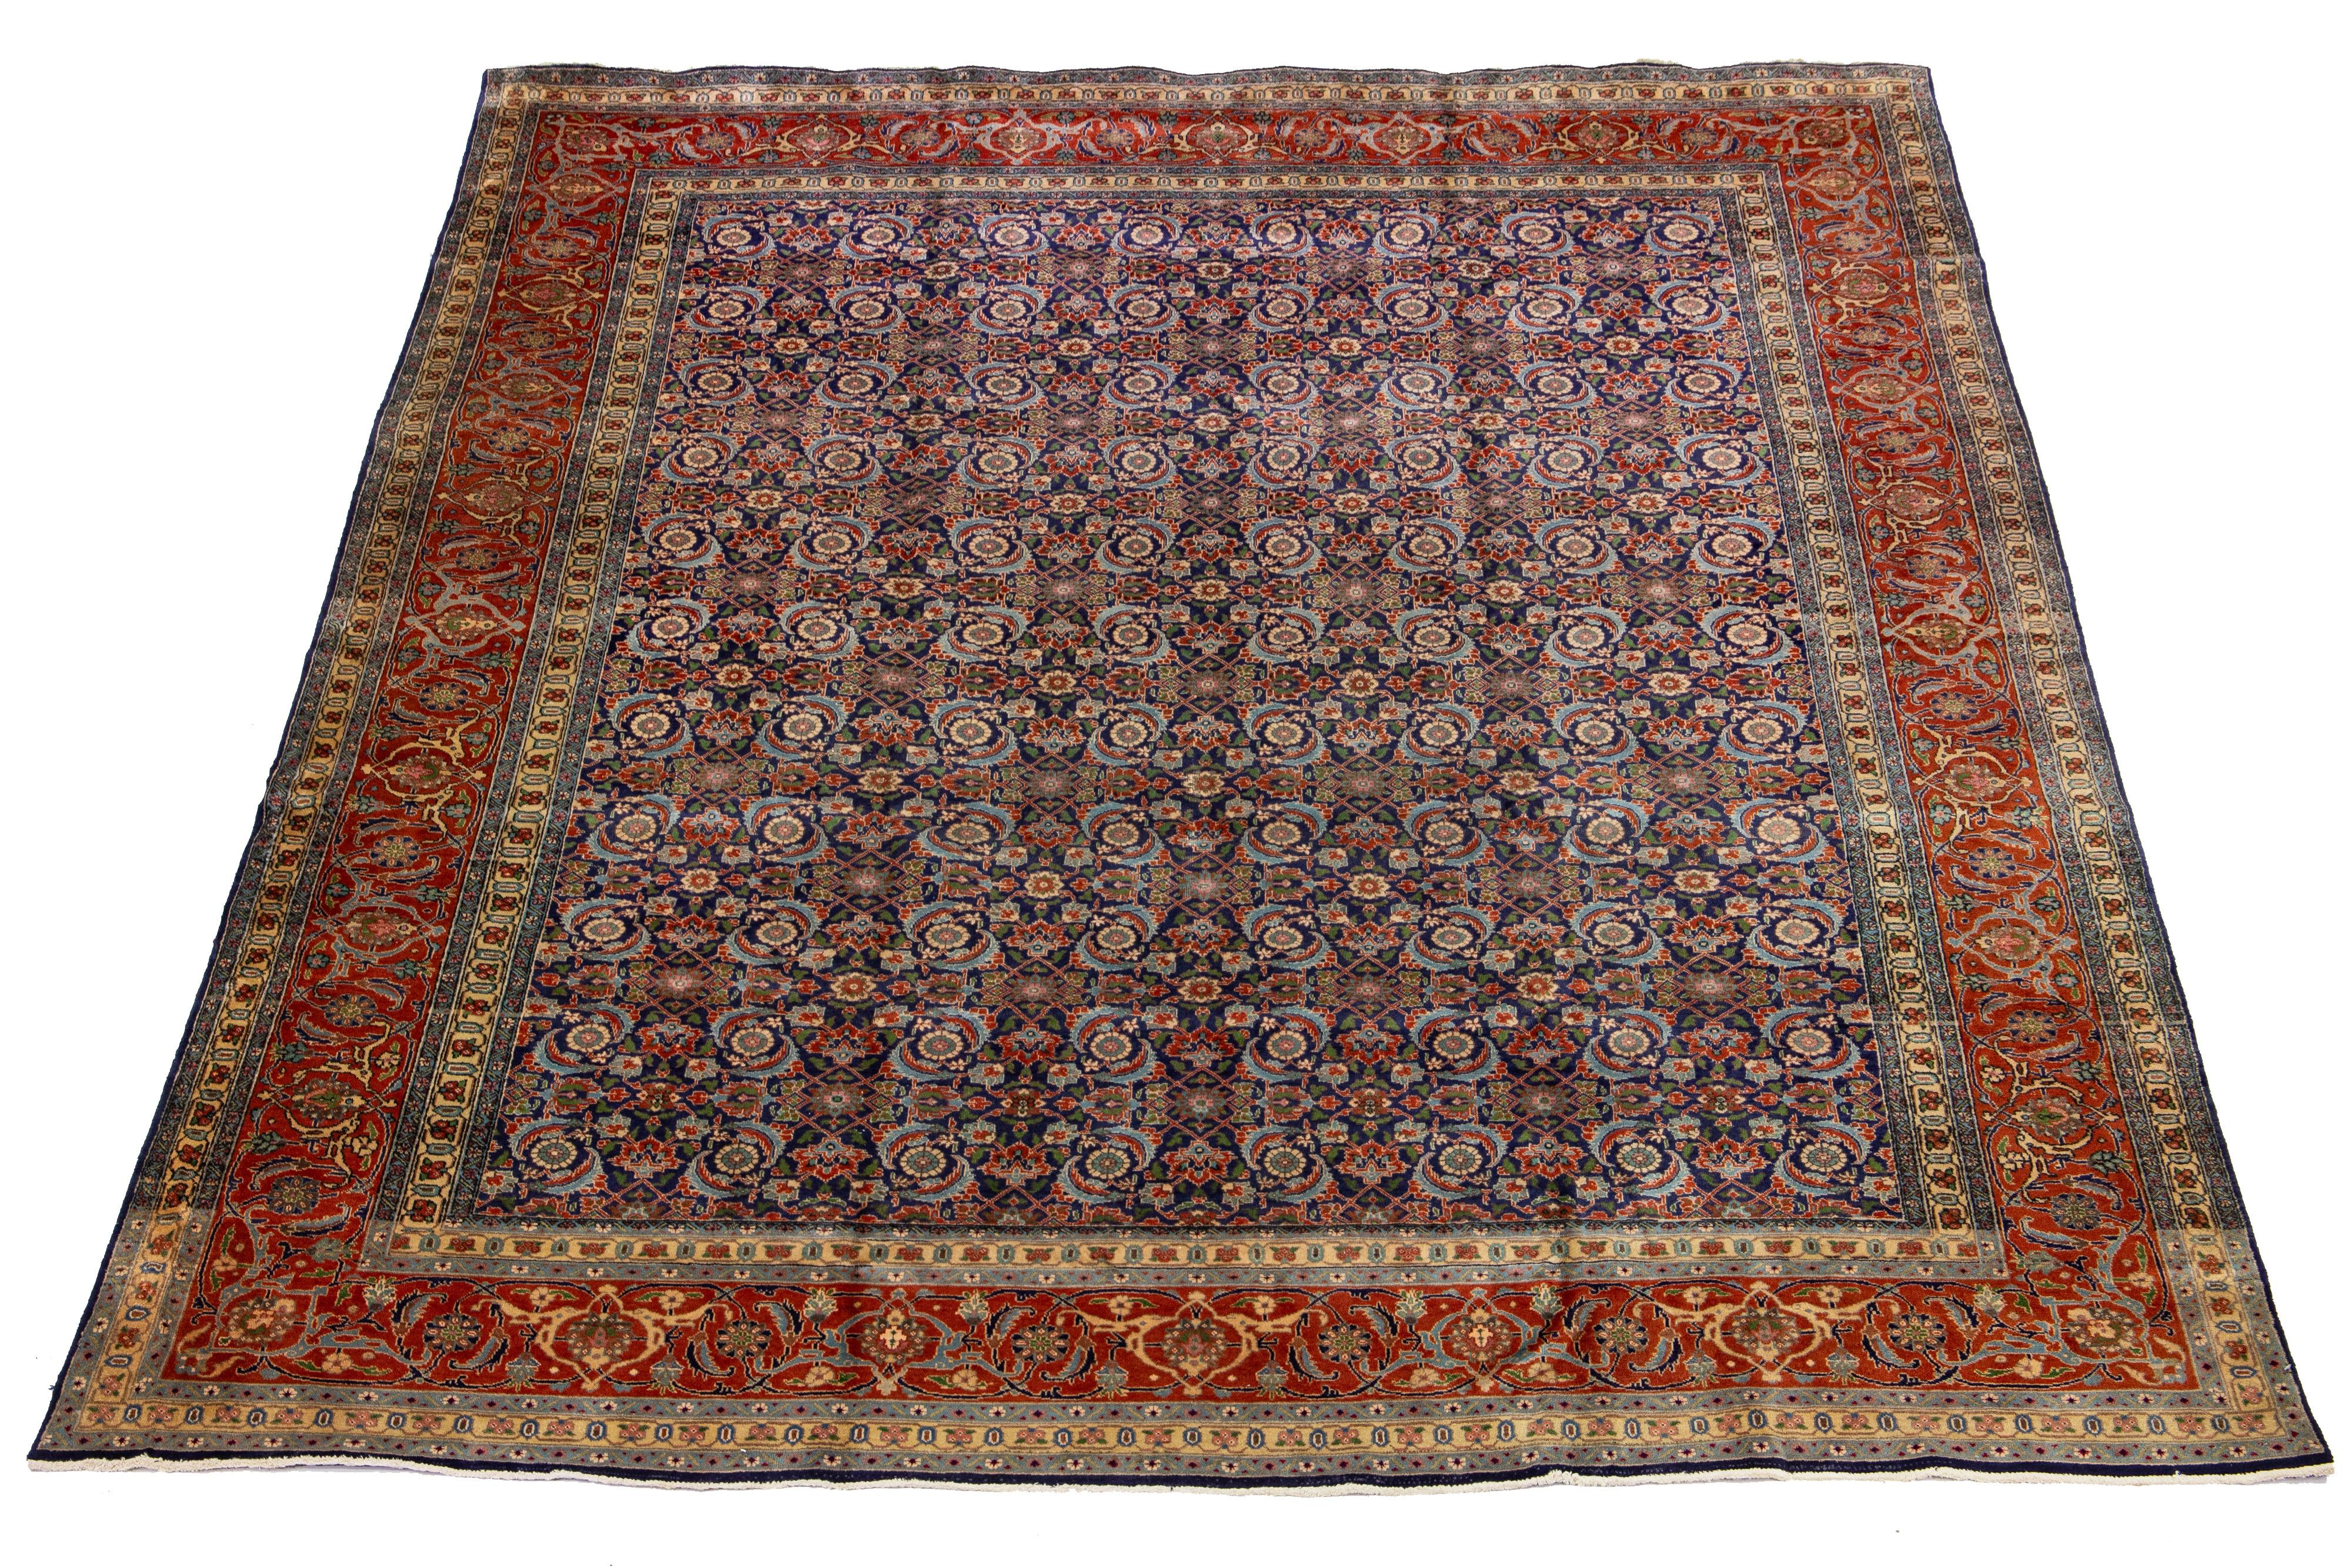 This Persian Tabriz wool rug is beautifully handcrafted and displays a classic all-over floral pattern. The navy blue background provides a contrast that accentuates the design, which features shades of rust-orange, light blue, and green.

This rug